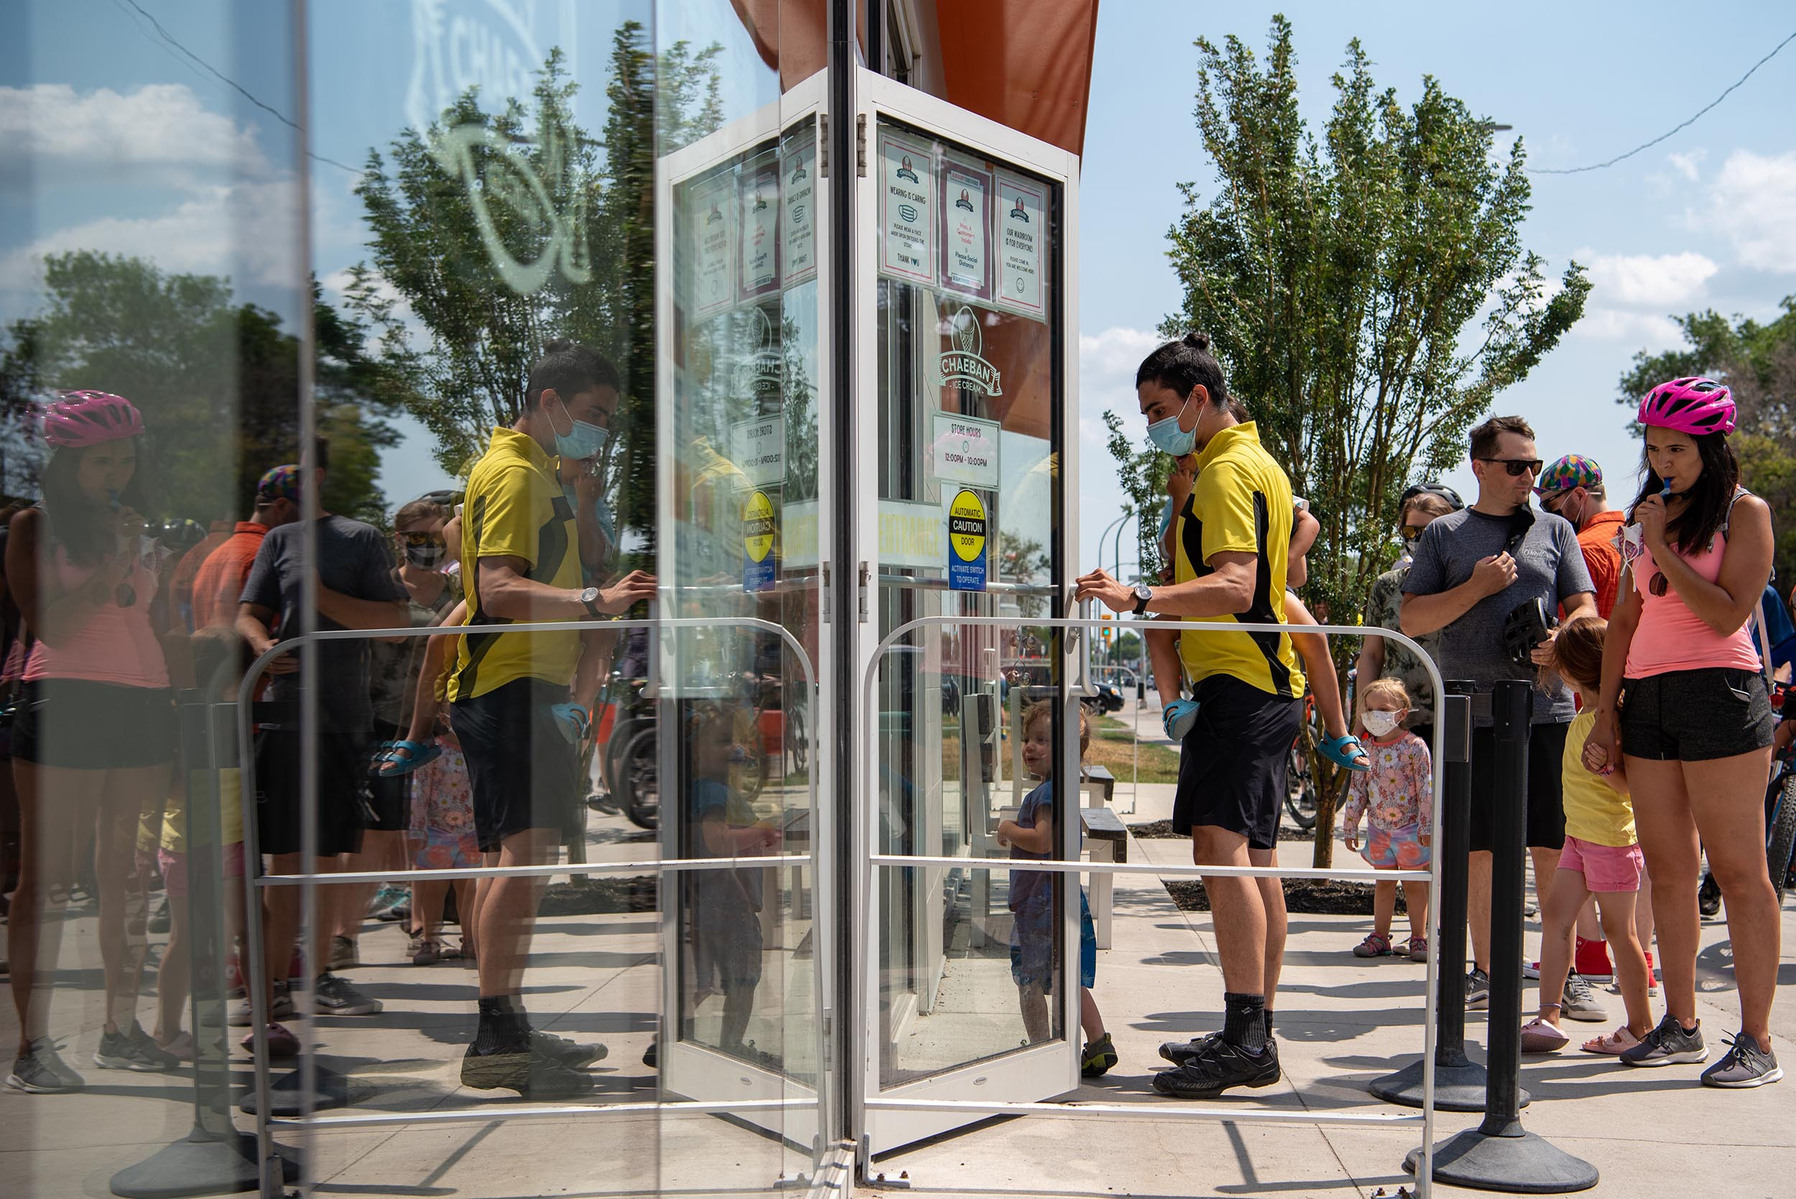 Cyclists taking part in the Tour de Glace, a 20-kilometre recreational event which makes stops at four local ice cream shops, wait in line outside of Chaeban Ice Cream in Winnipeg on July 24, 2021.  Photo by Alex Lupul